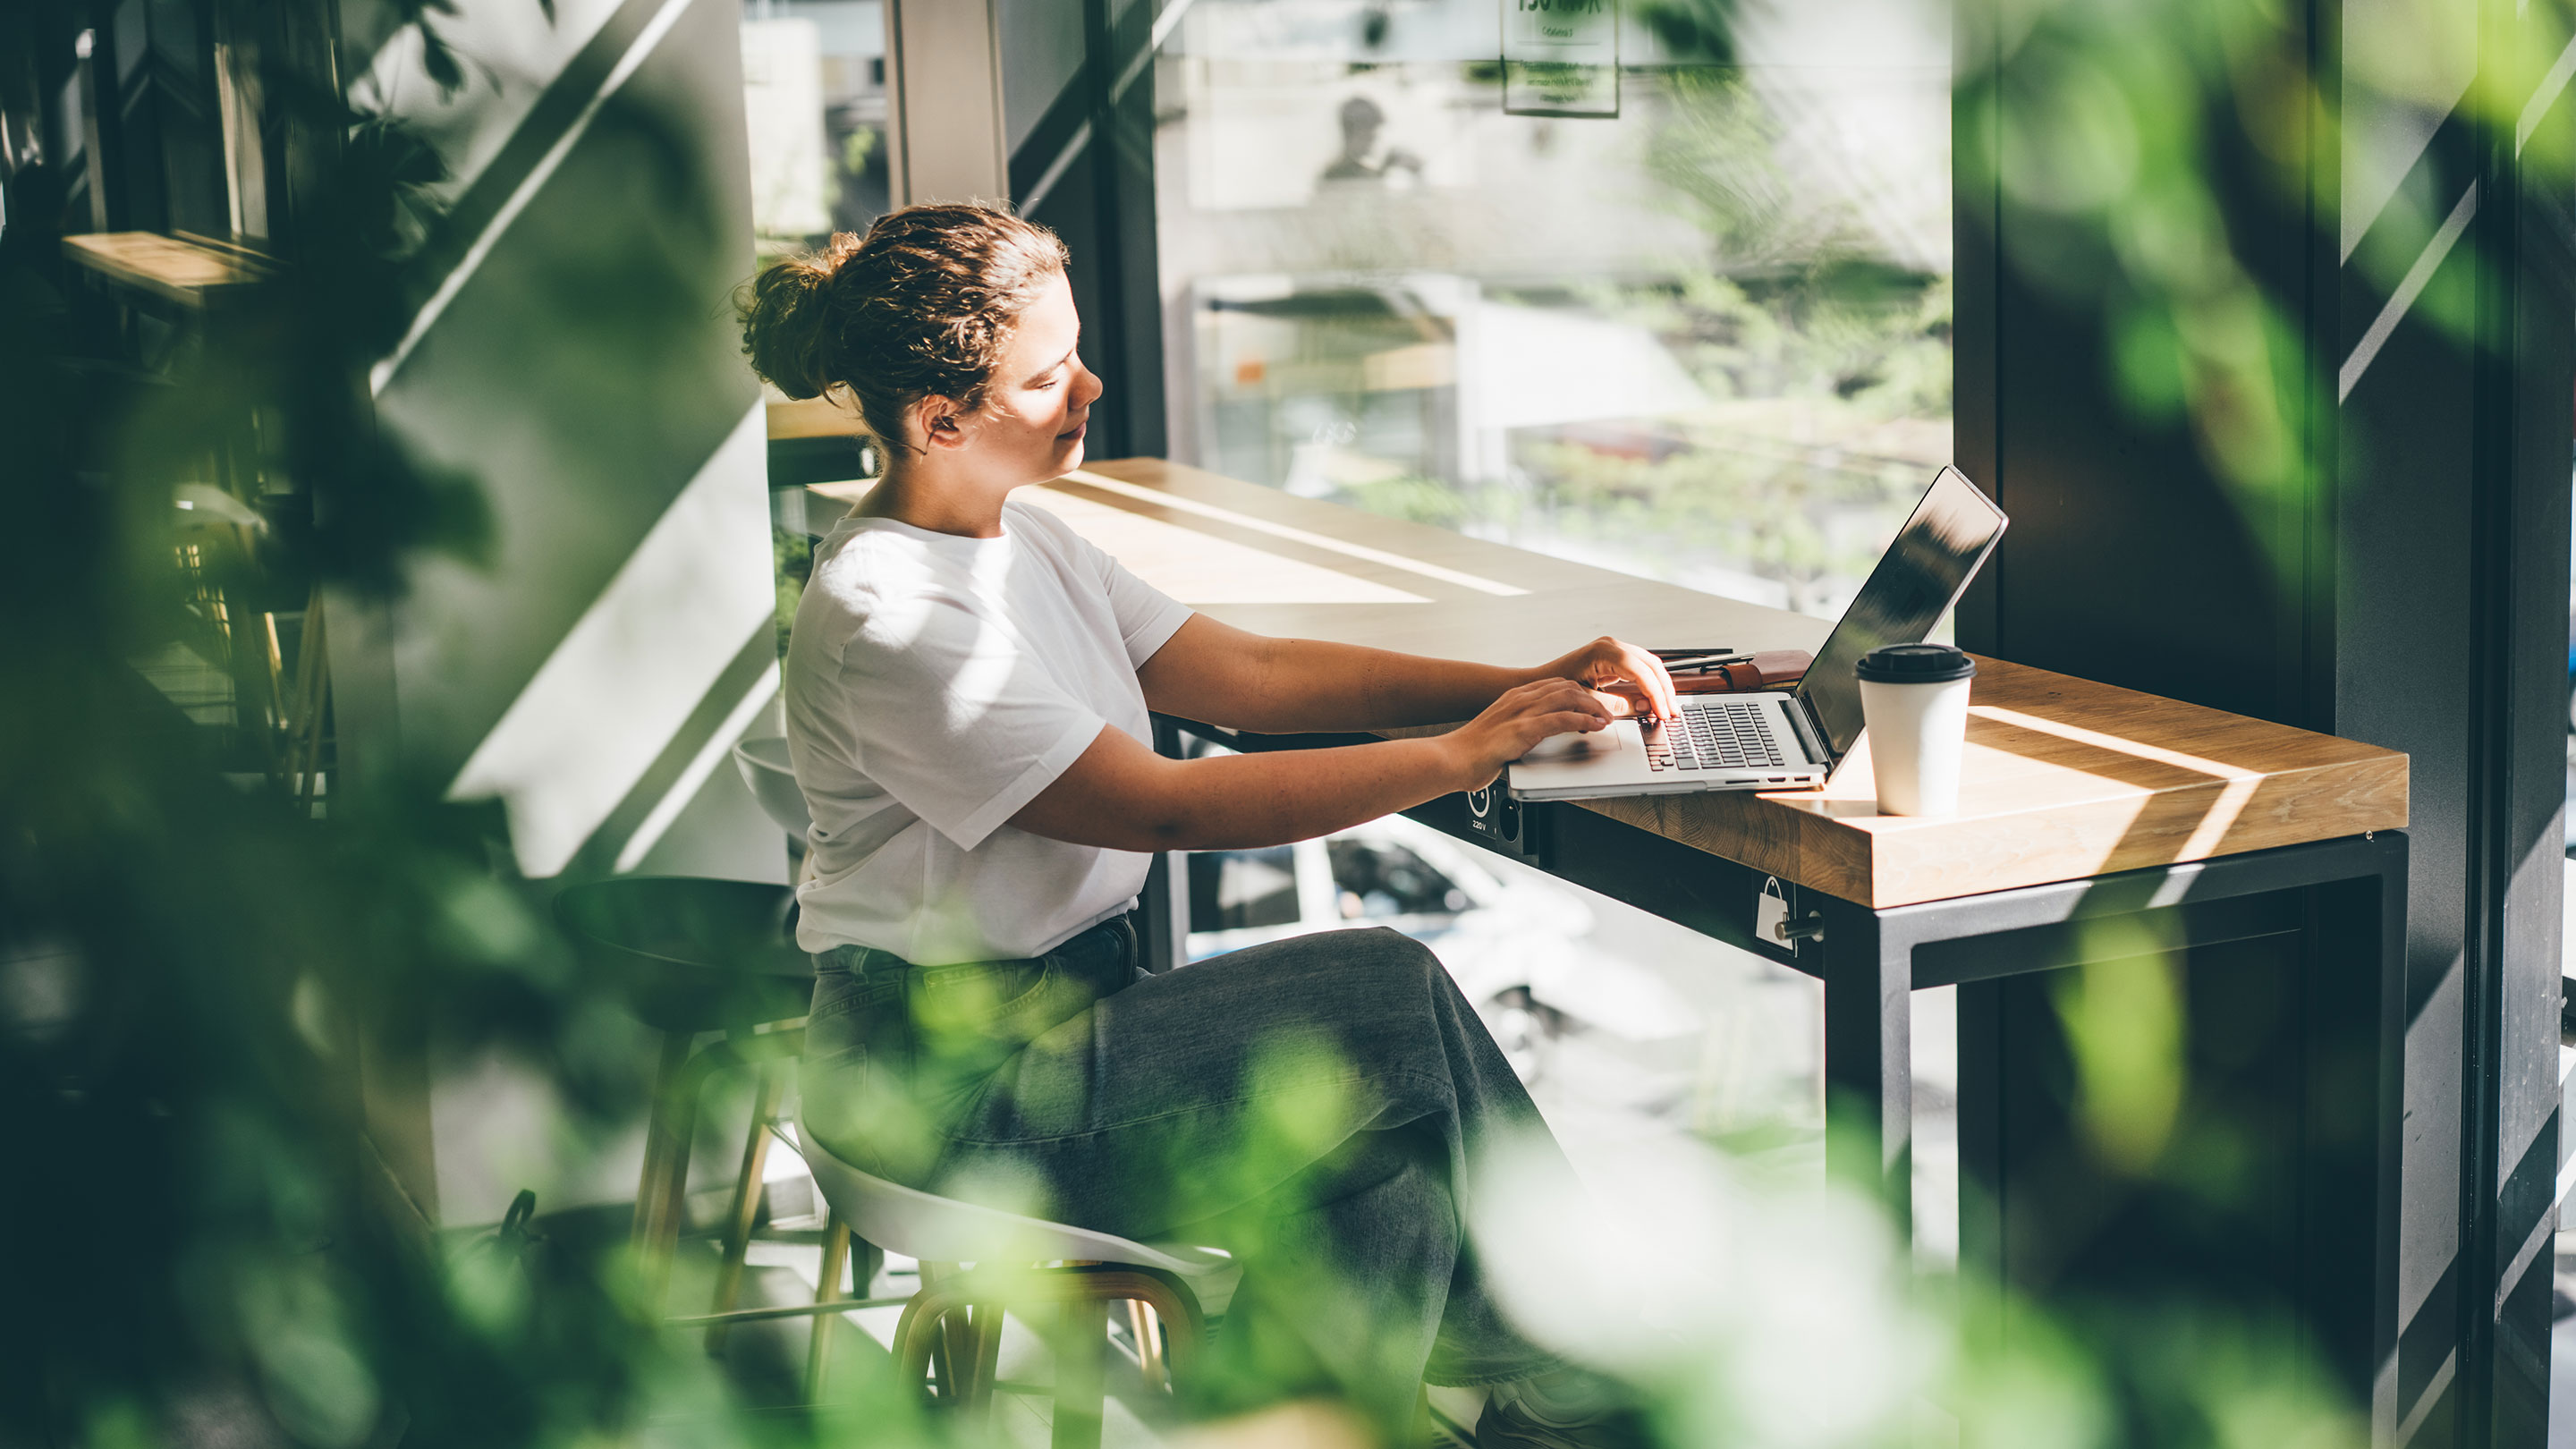 Woman sat working on a laptop surrounded by houseplants 